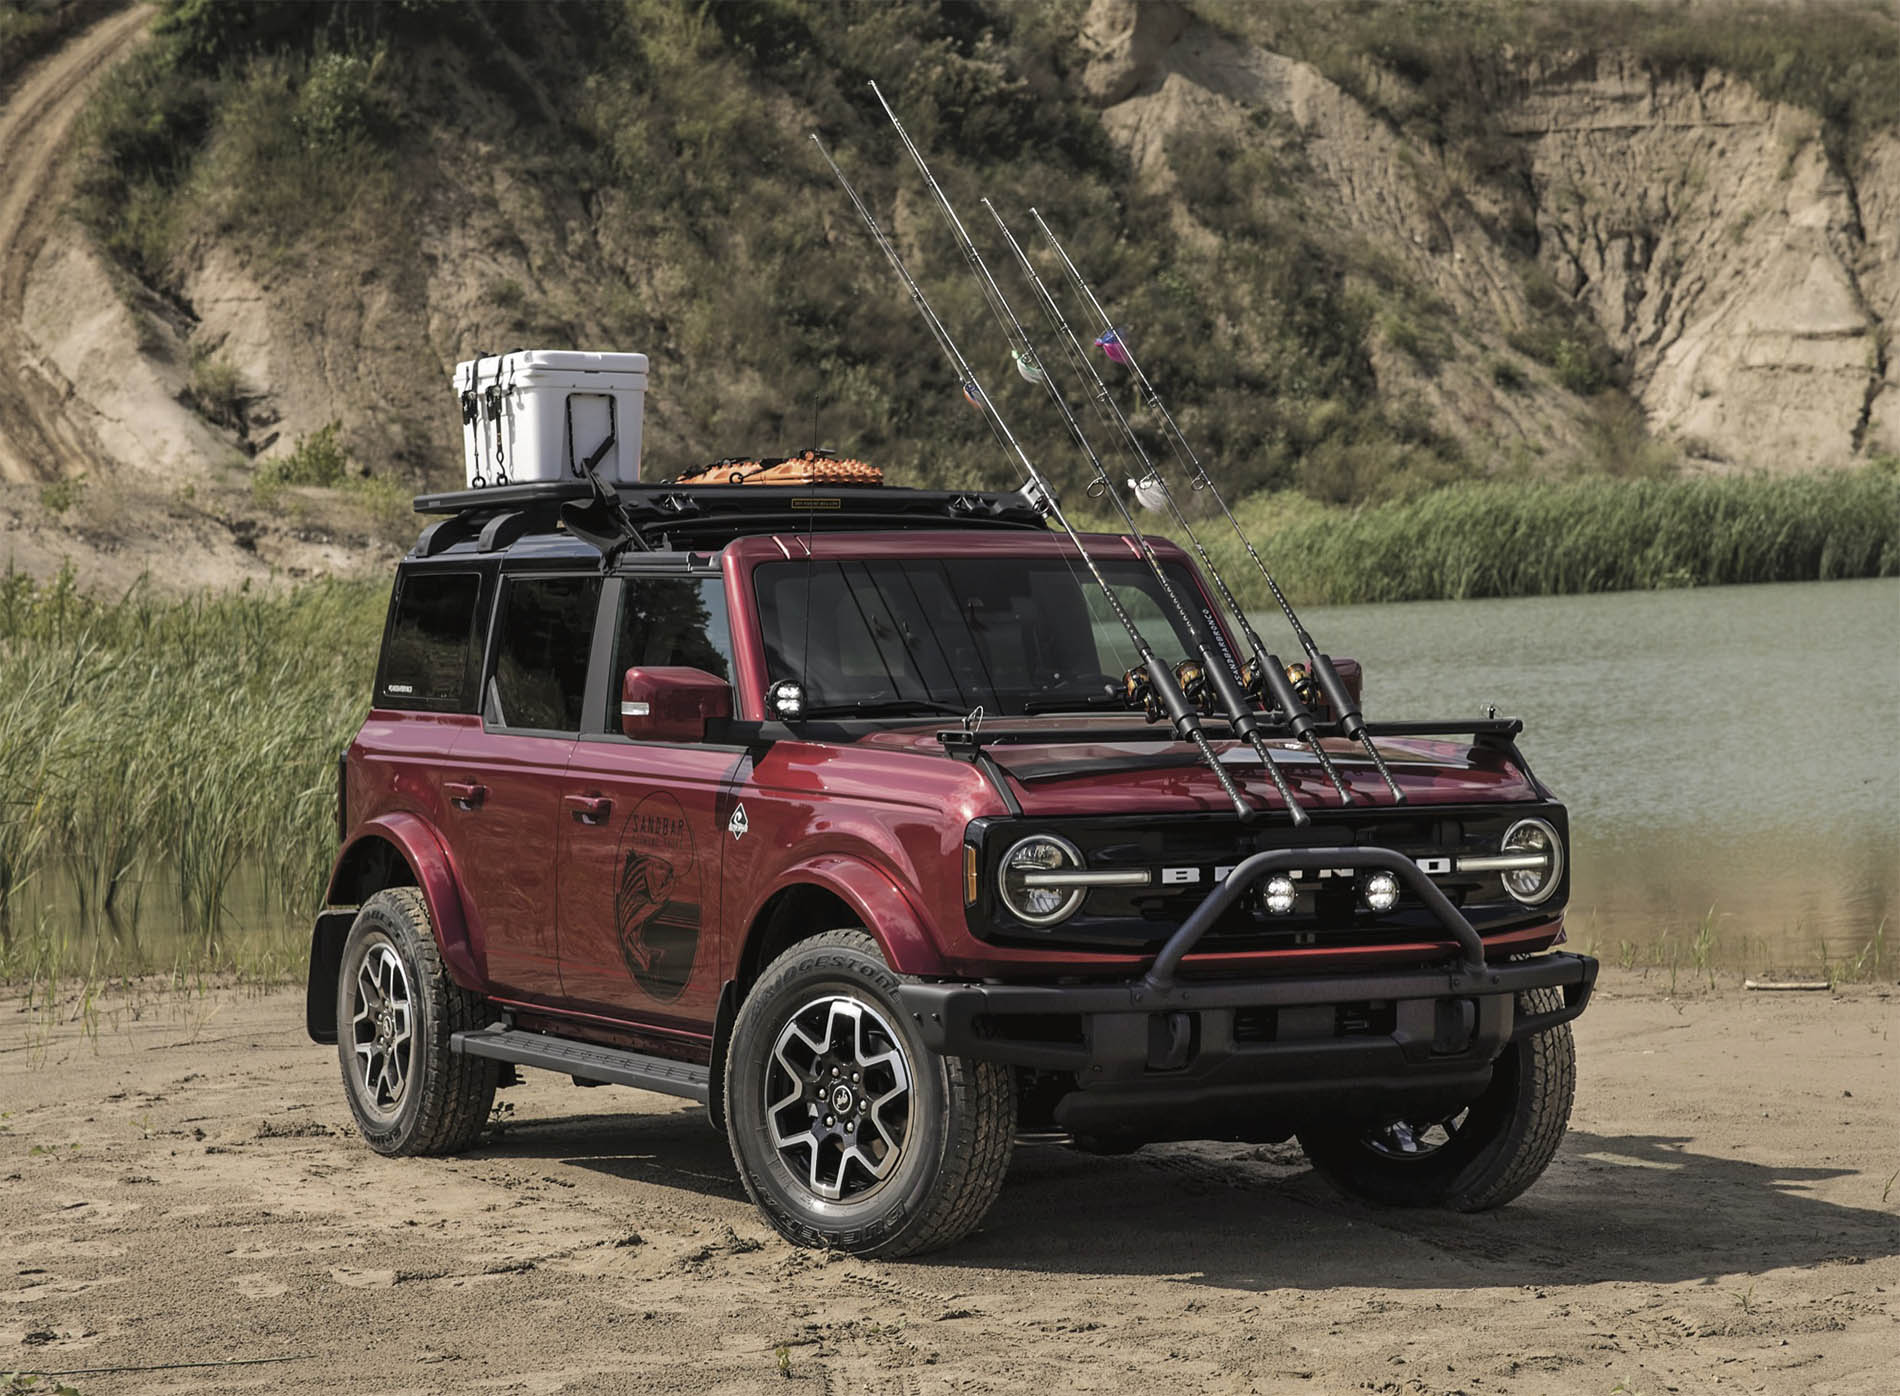 Ford Bronco Introducing the Bronco Four-Door Outer Banks Fishing Guide (Accessories) Concept 1597586885445